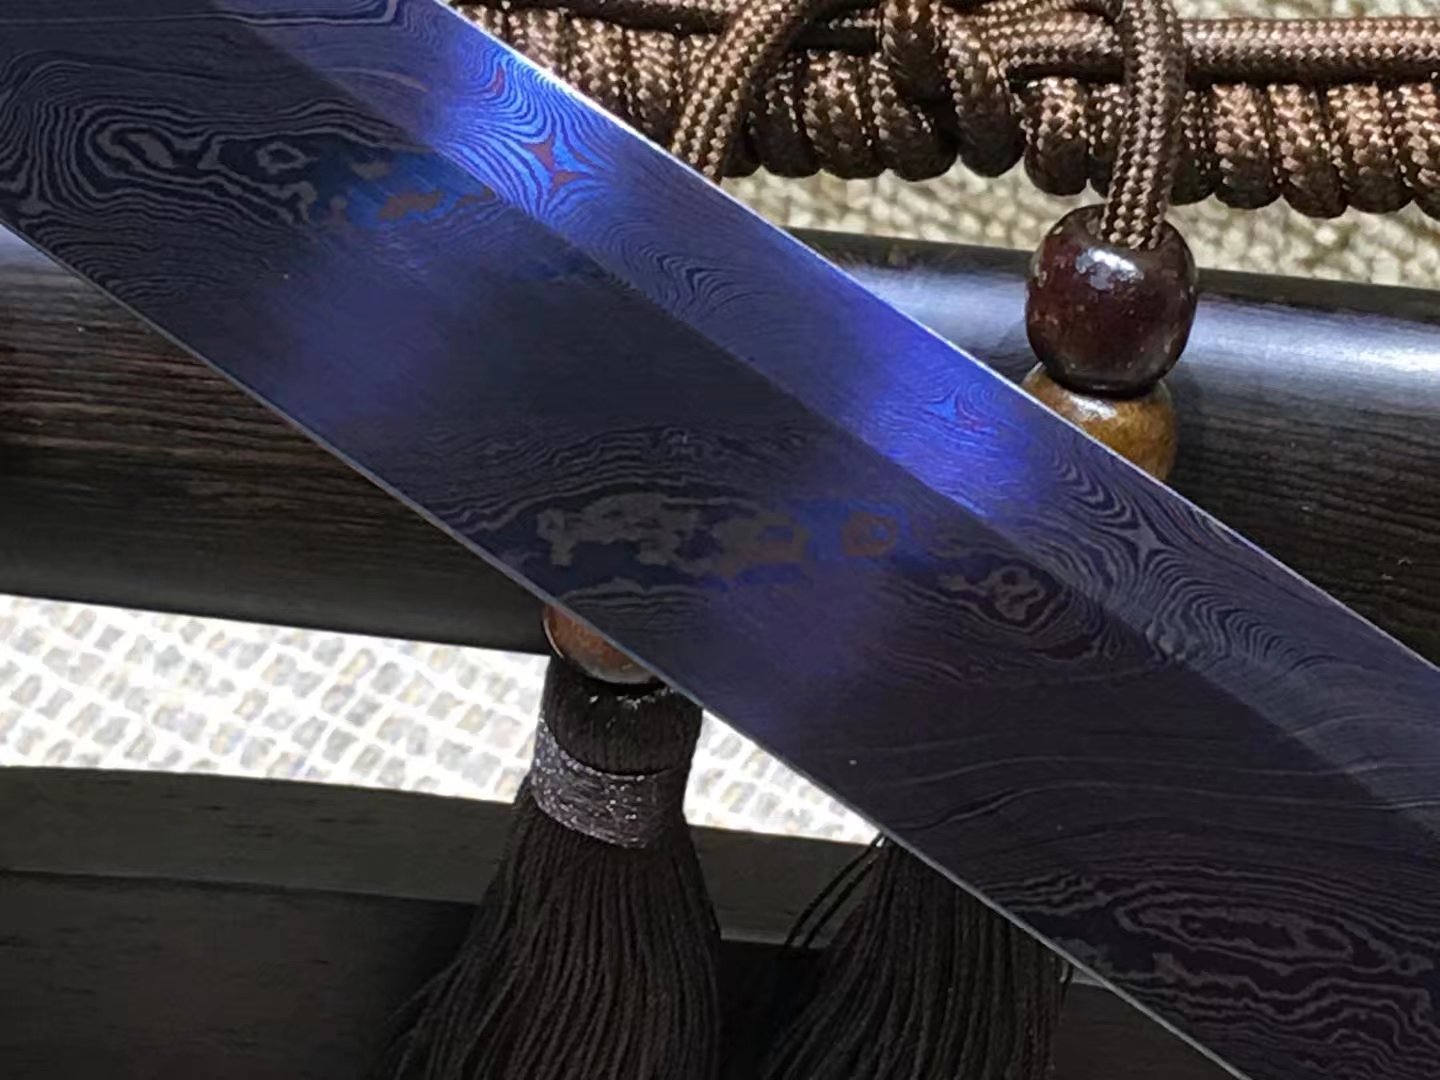 Tang dao,Damascus steel blue blade,Ebony scabbard,Brass fittings - Chinese sword shop